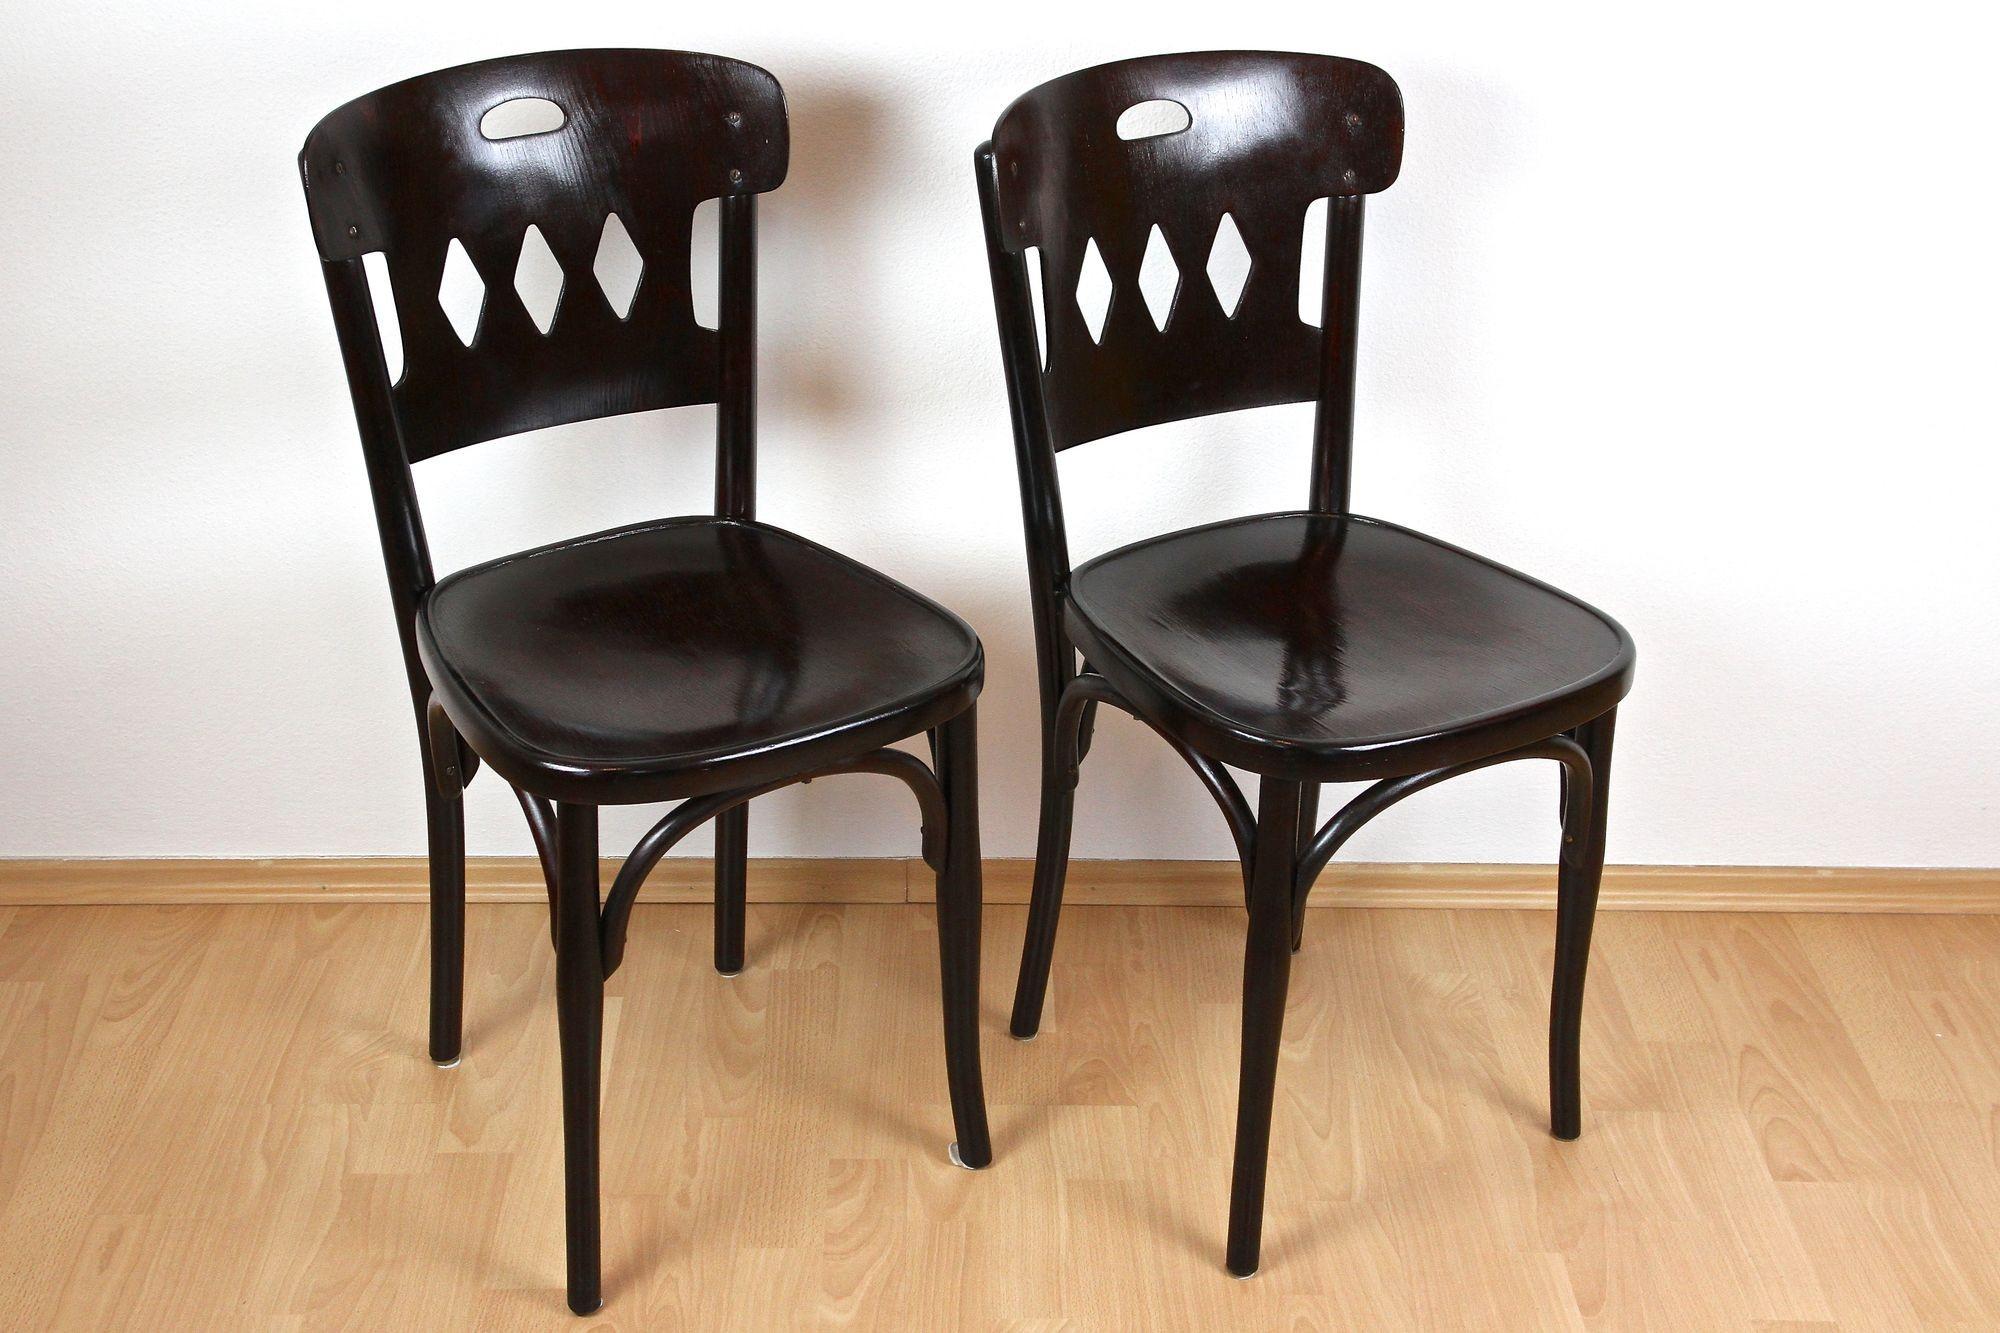 Pair Of Art Nouveau Bentwood Chairs by J&J Kohn, Vienna ca. 1910 In Good Condition For Sale In Lichtenberg, AT